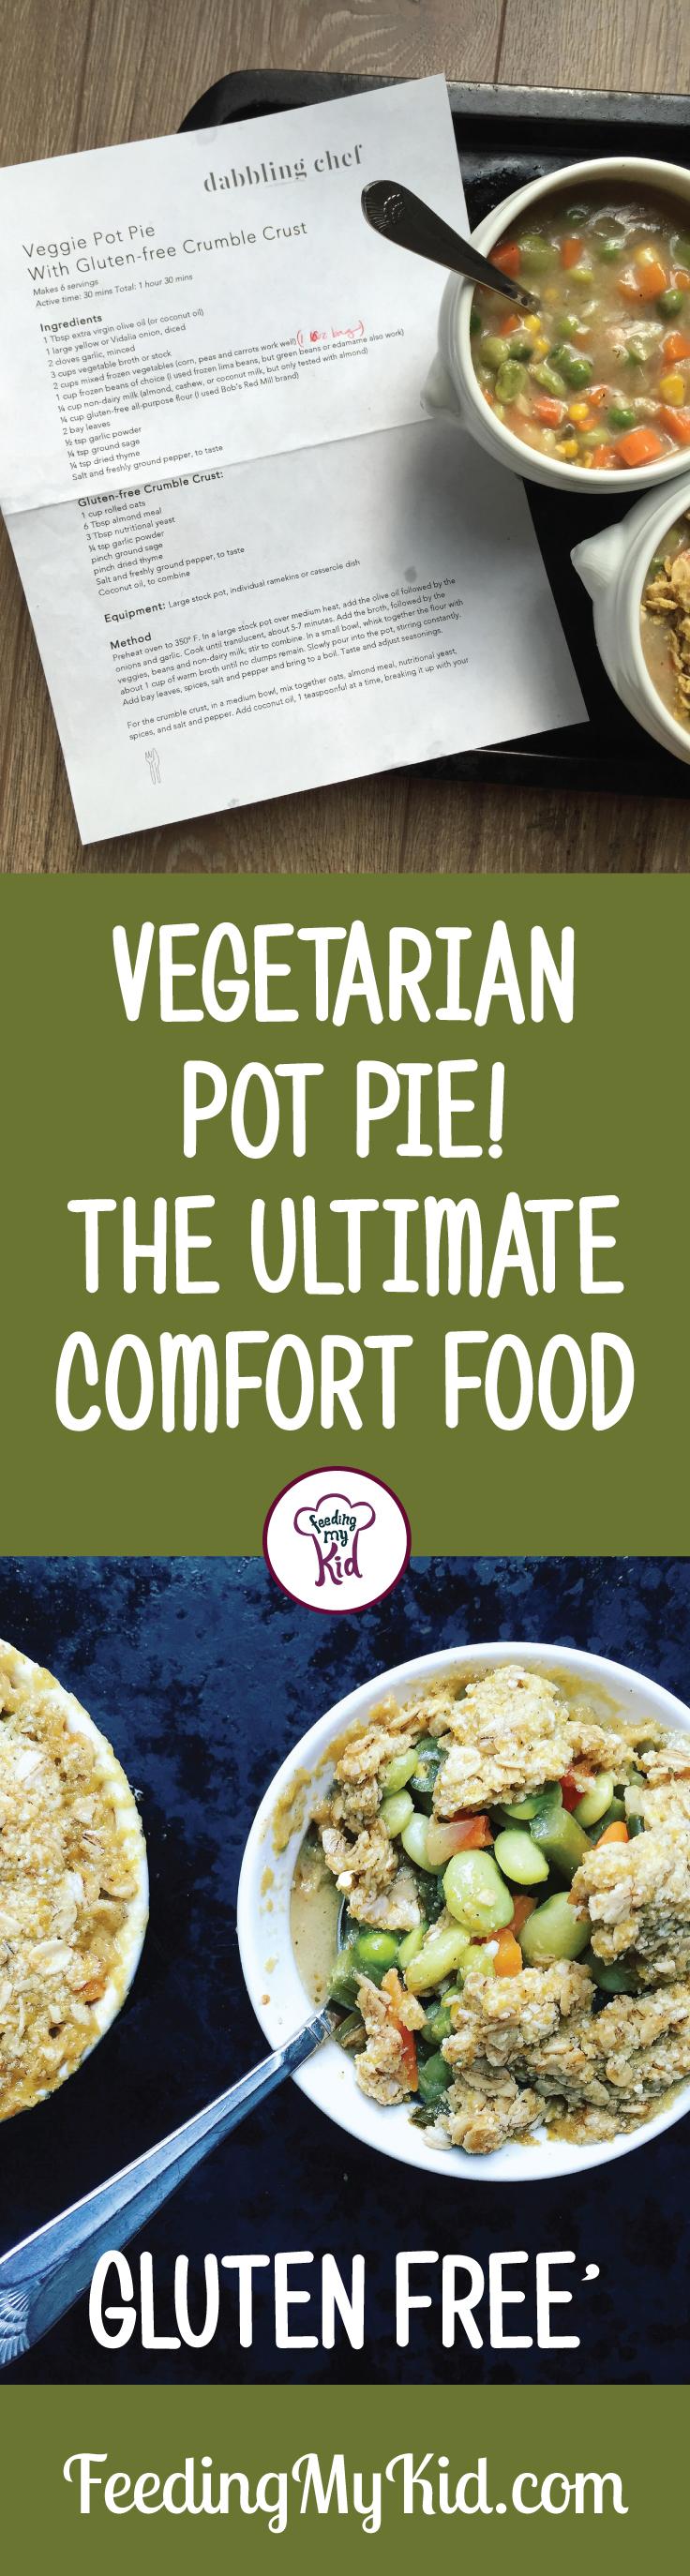 You need to try this amazingly tasty vegetarian pot pie recipe! It's perfect for any meal! Filled with veggies and a delicious, gluten-free pie crust.